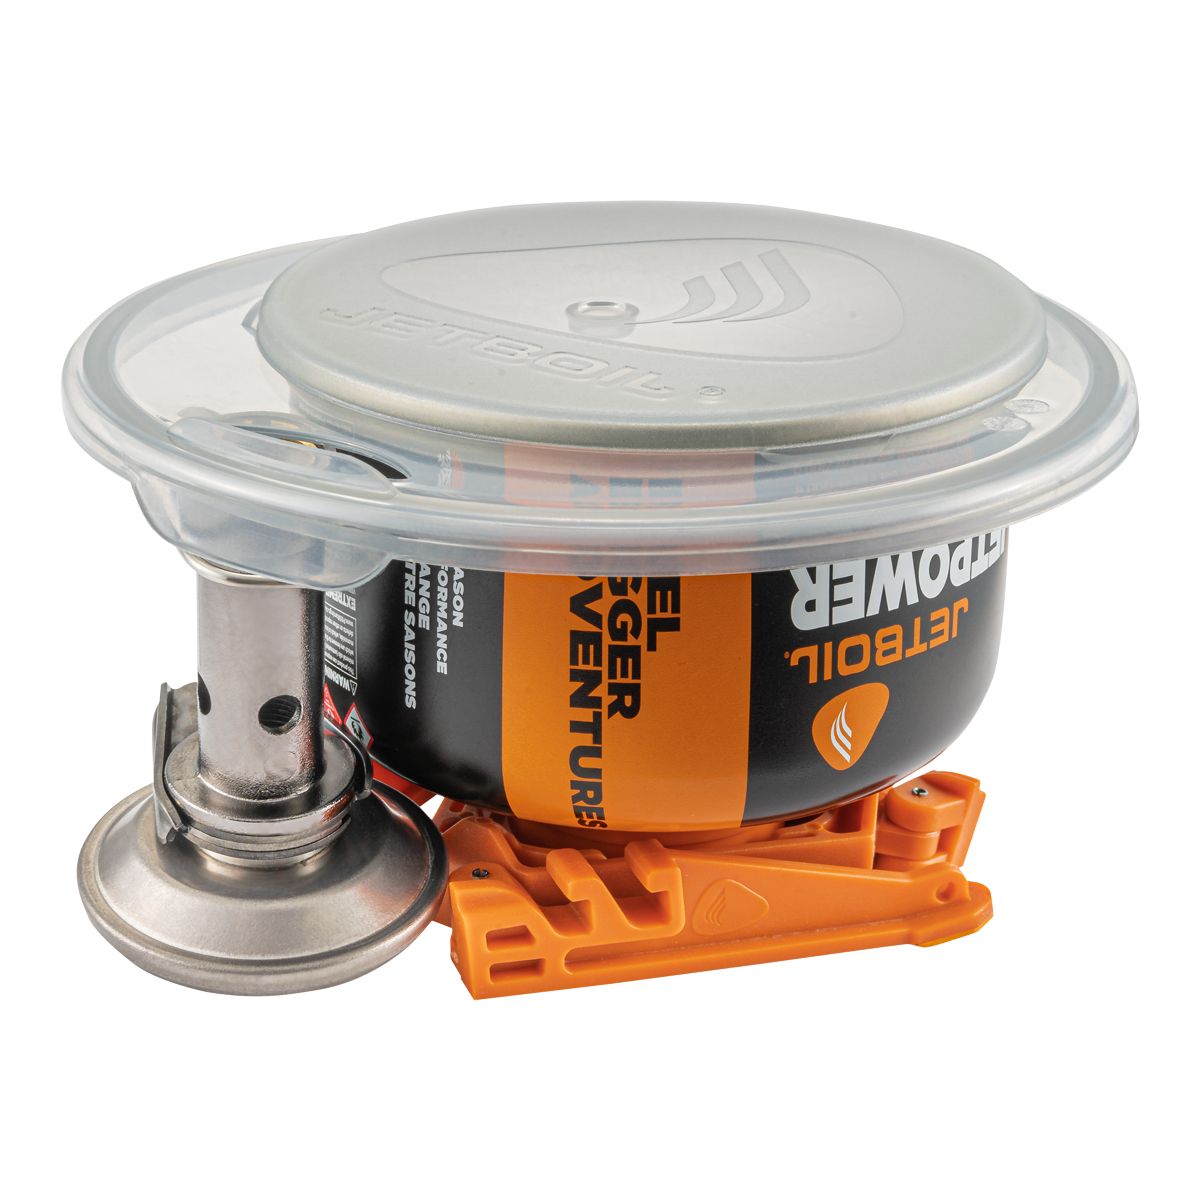 Image of Jetboil Stash Cooking System